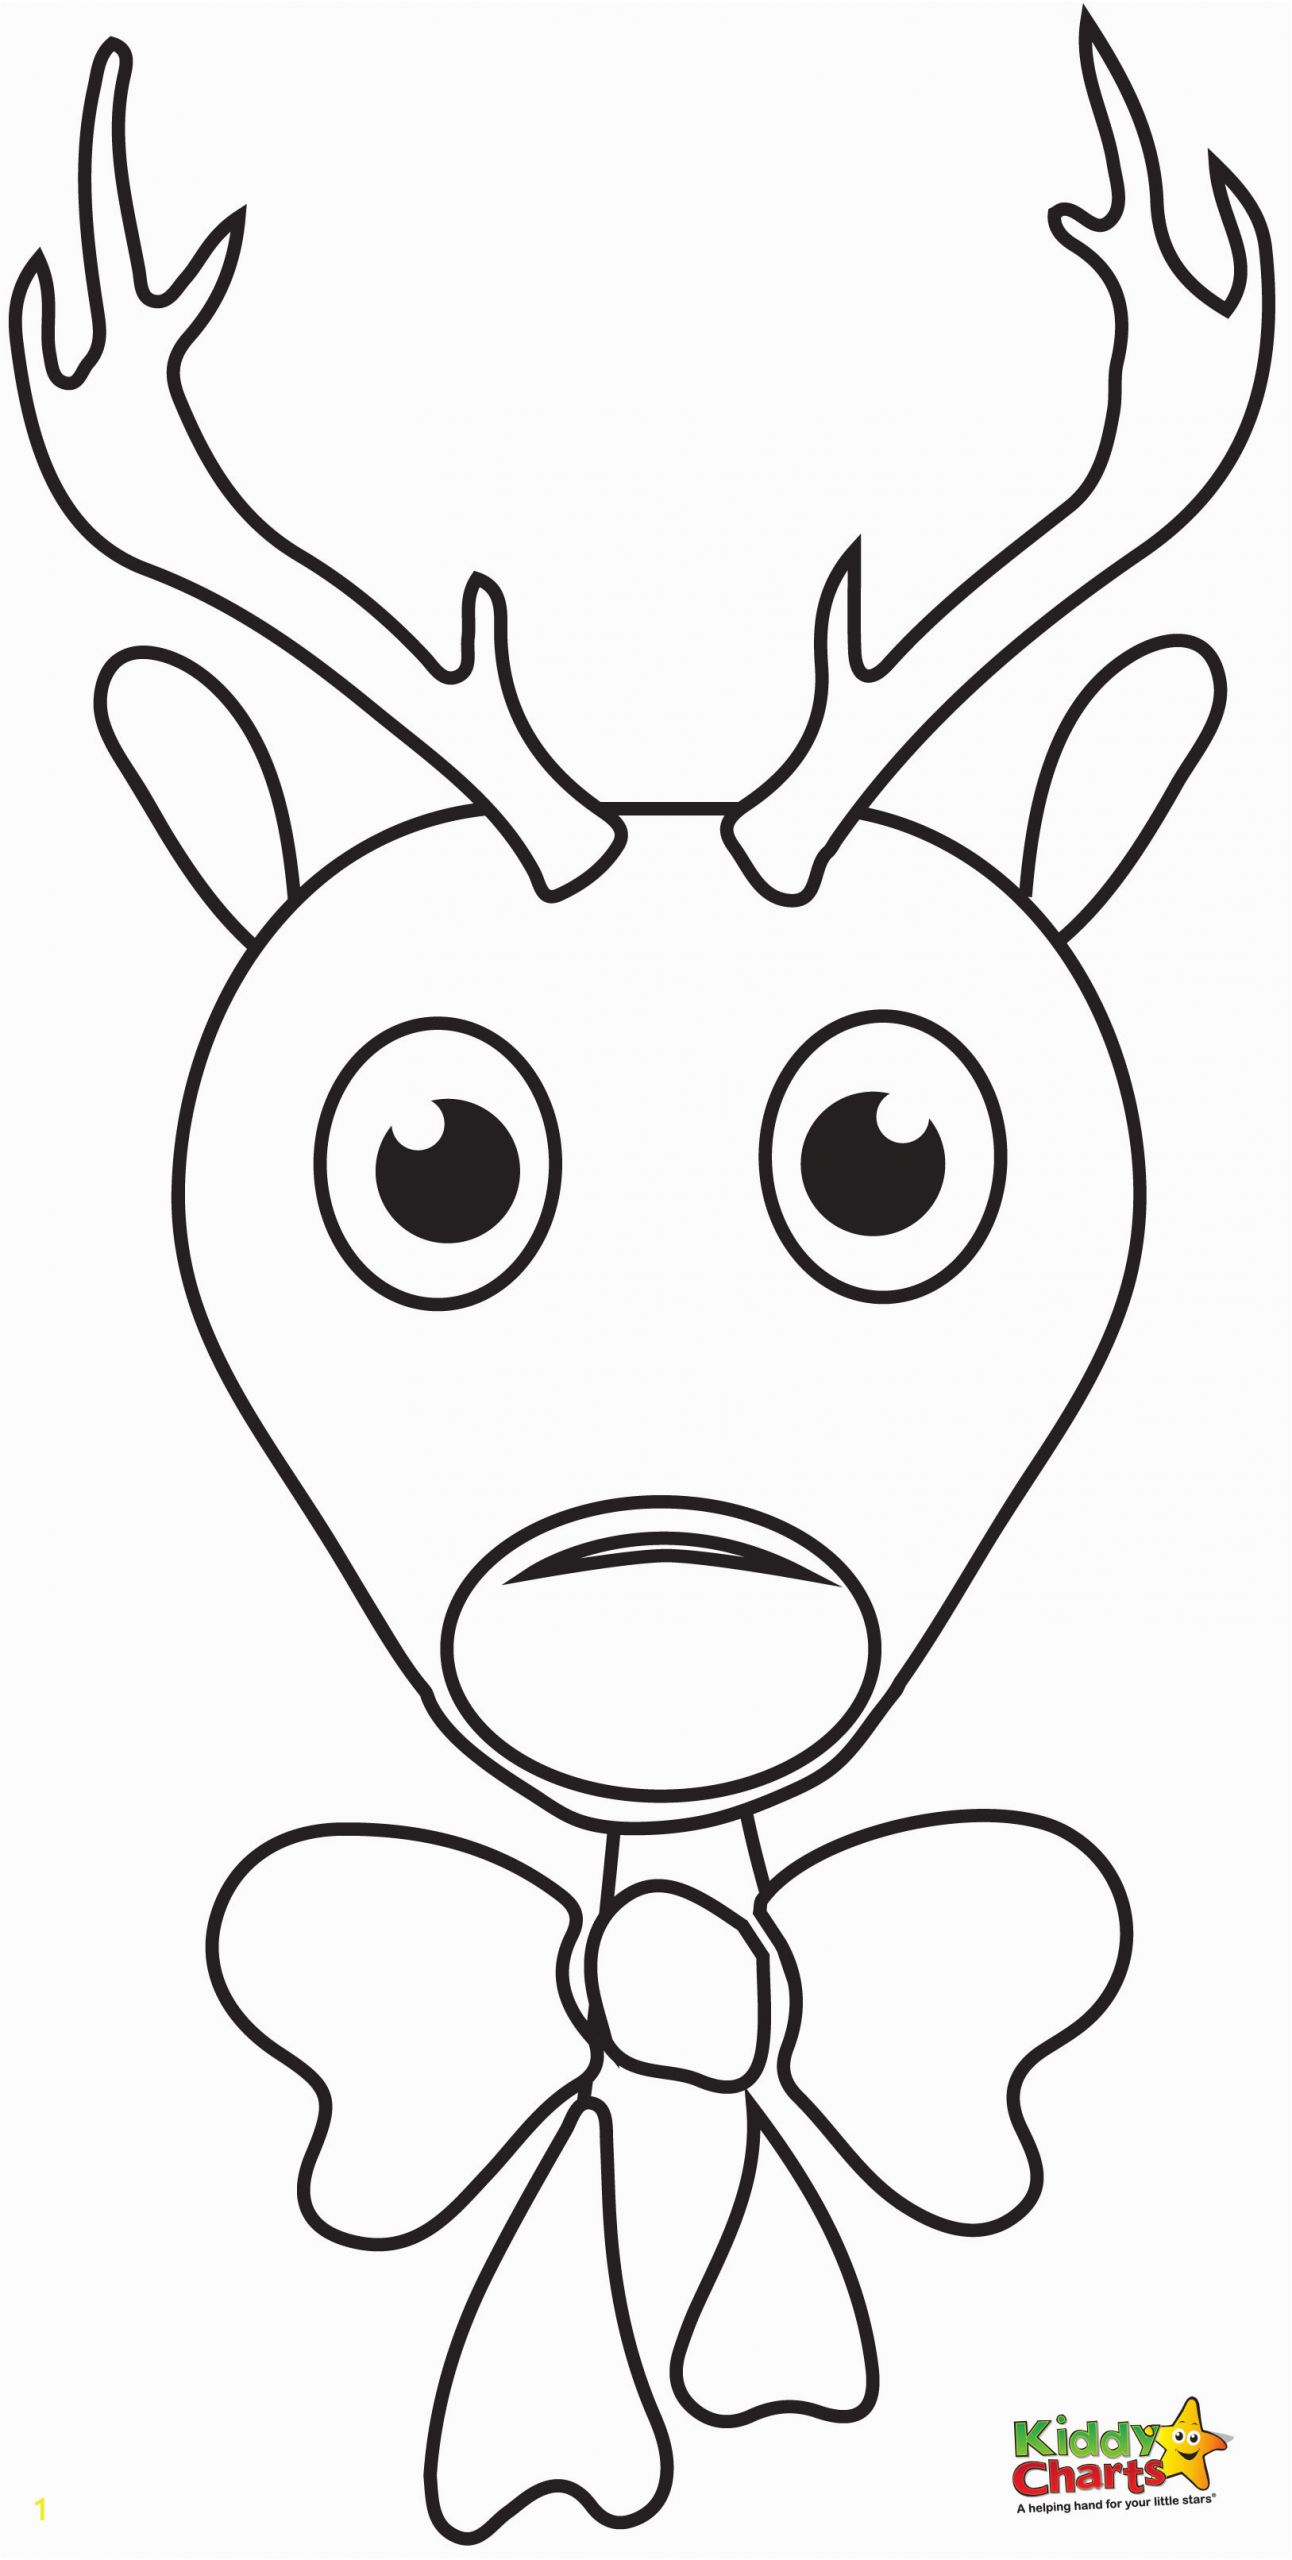 rudolph the red nosed reindeer coloring pages to print